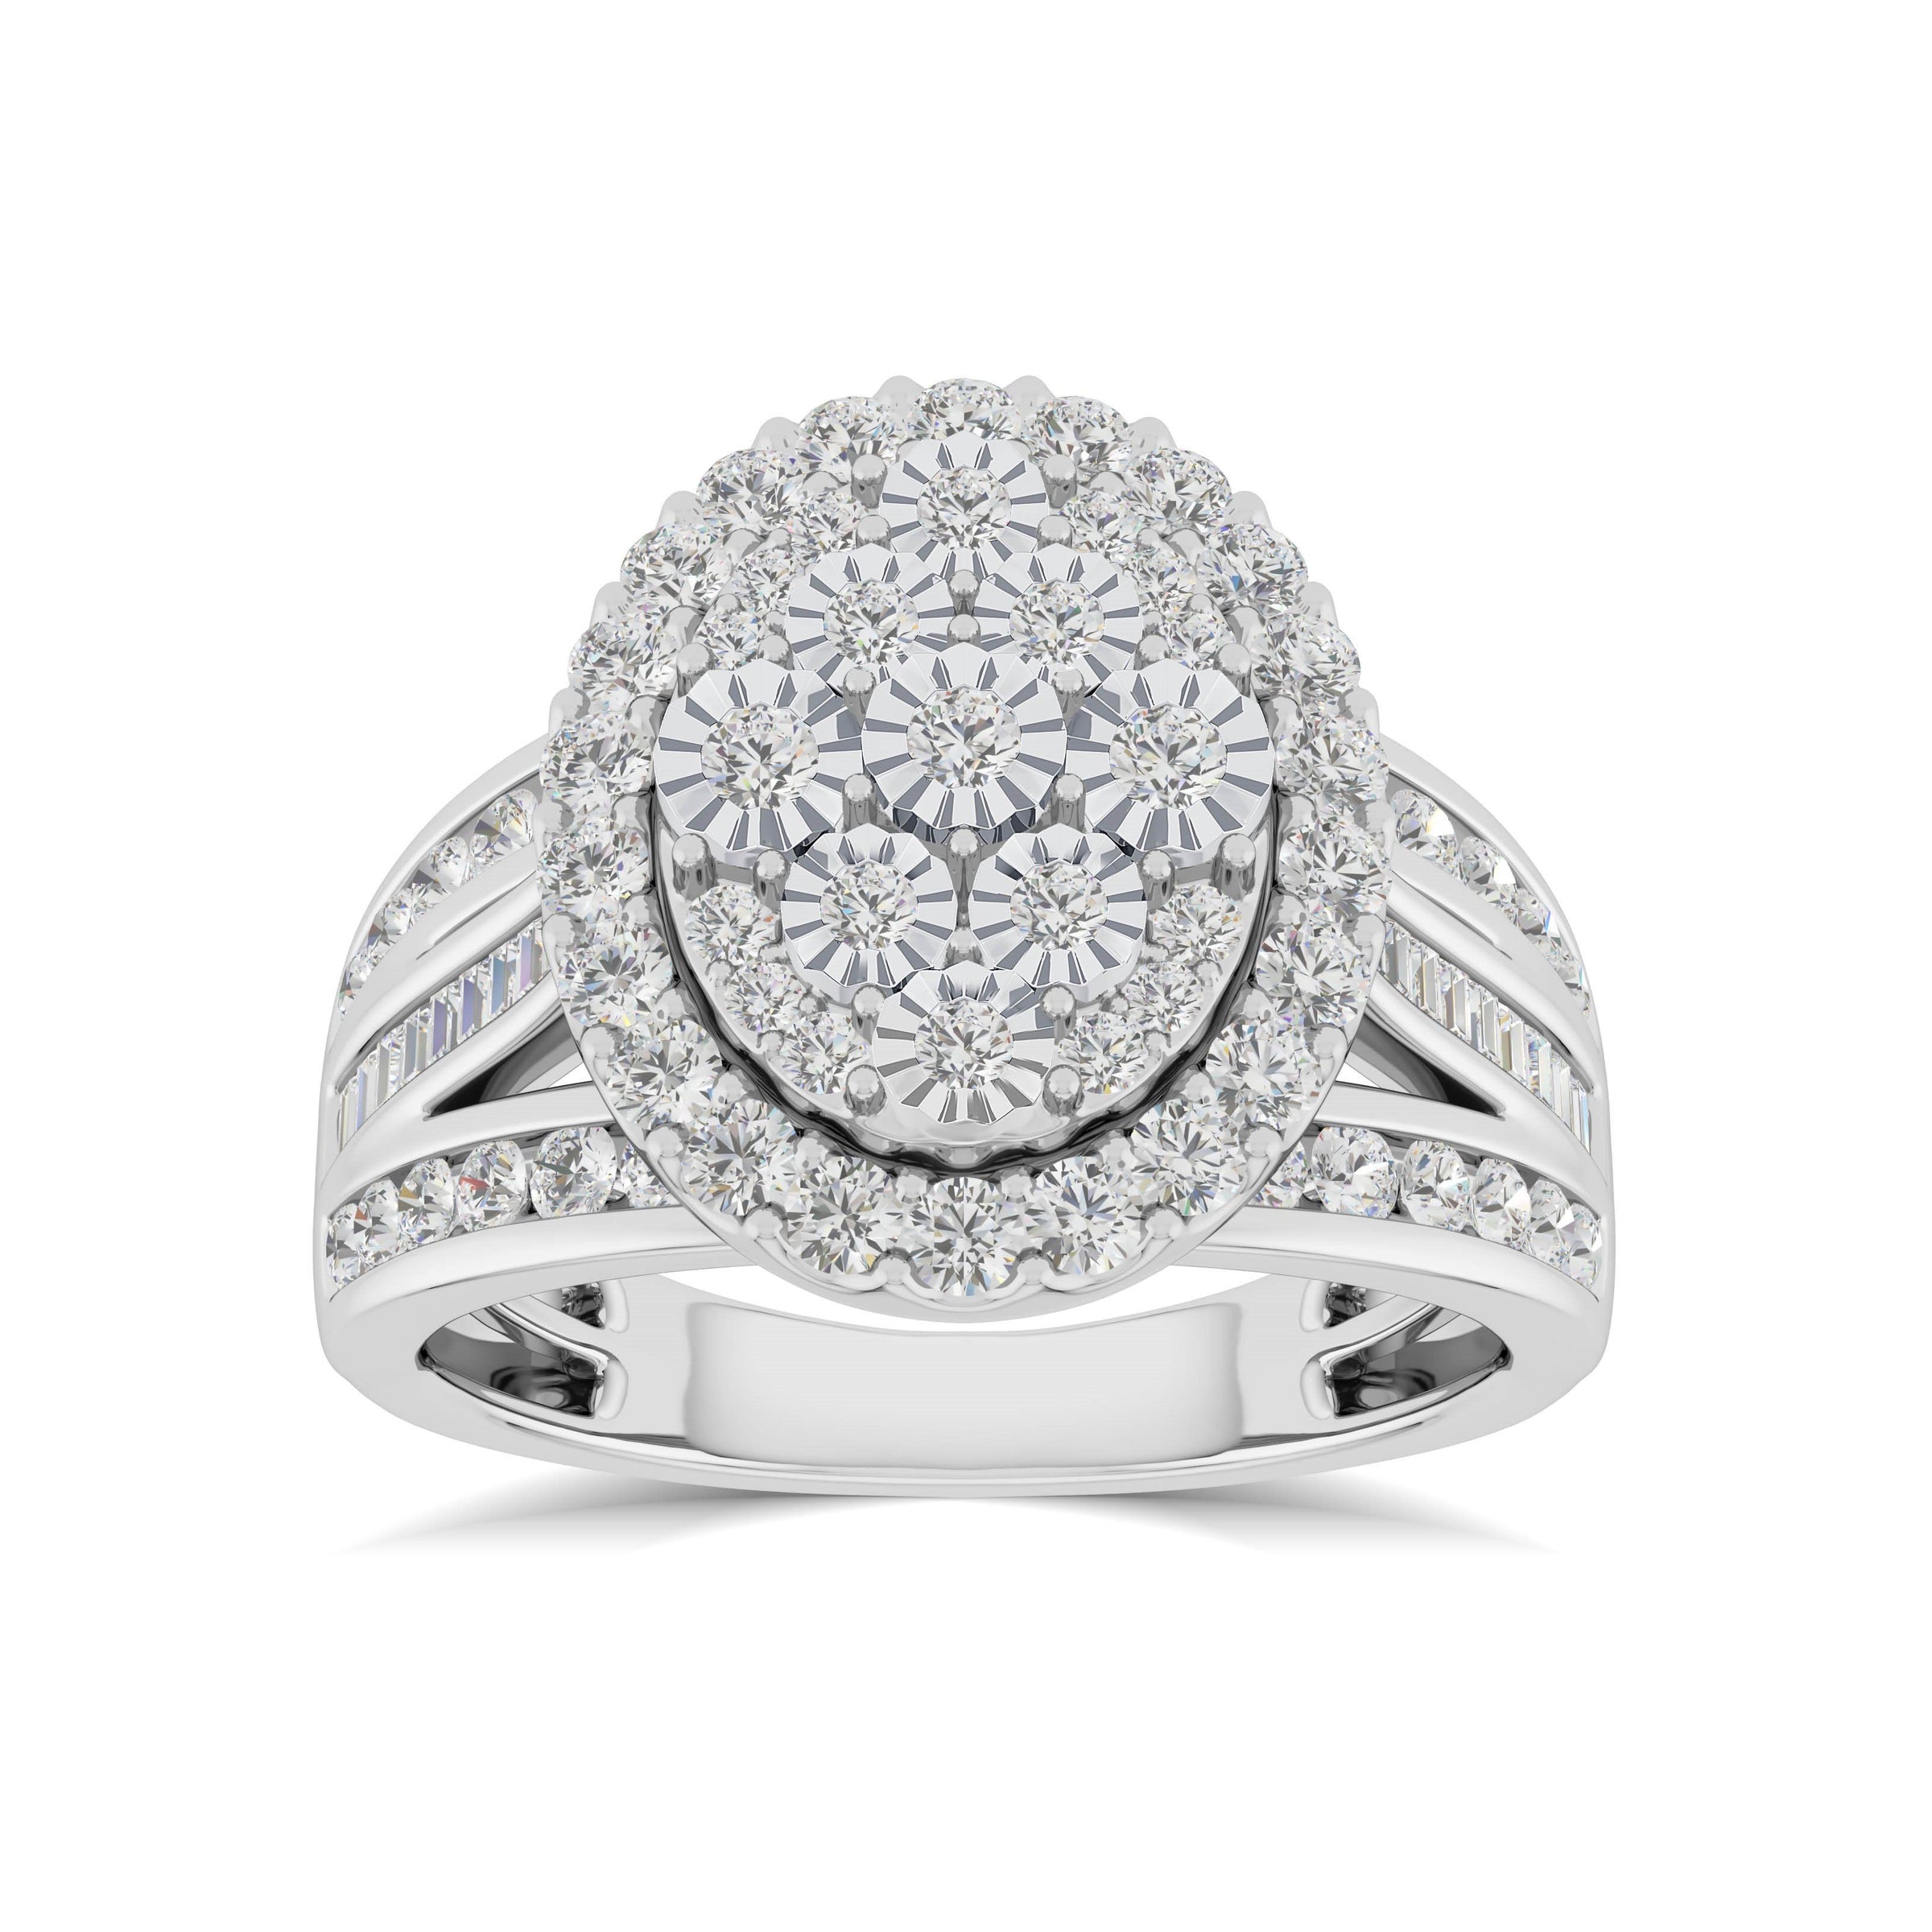 Oval Halo Ring with 1.00ct of Diamonds in 9ct White Gold Rings Bevilles 